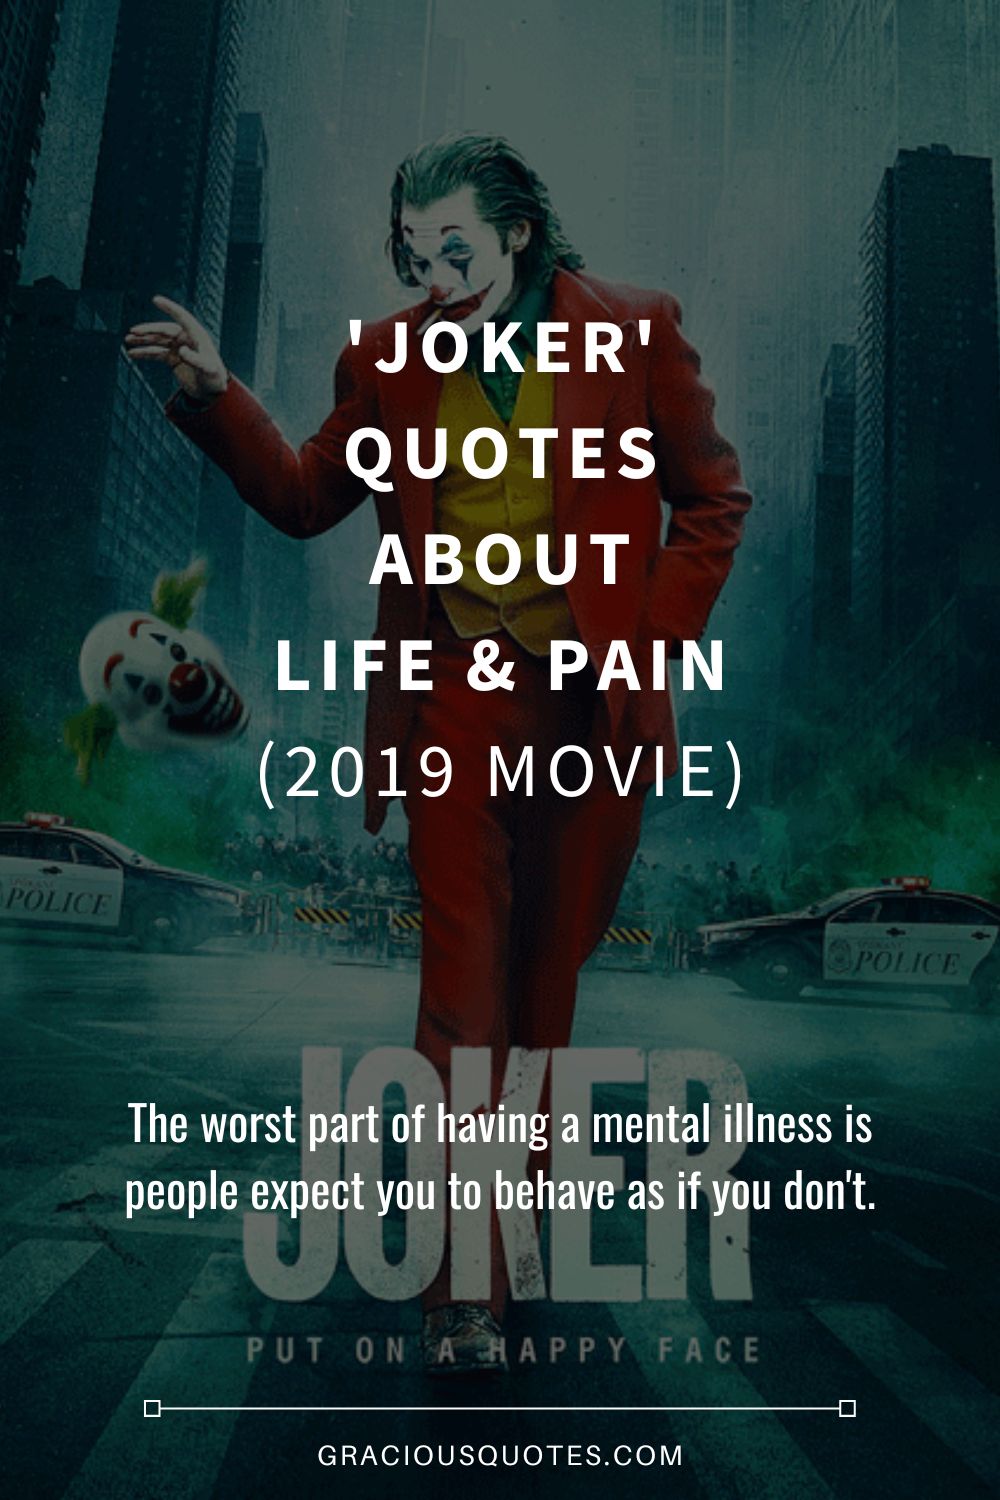 'Joker' Quotes About Life & Pain (2019 MOVIE) - Gracious Quotes